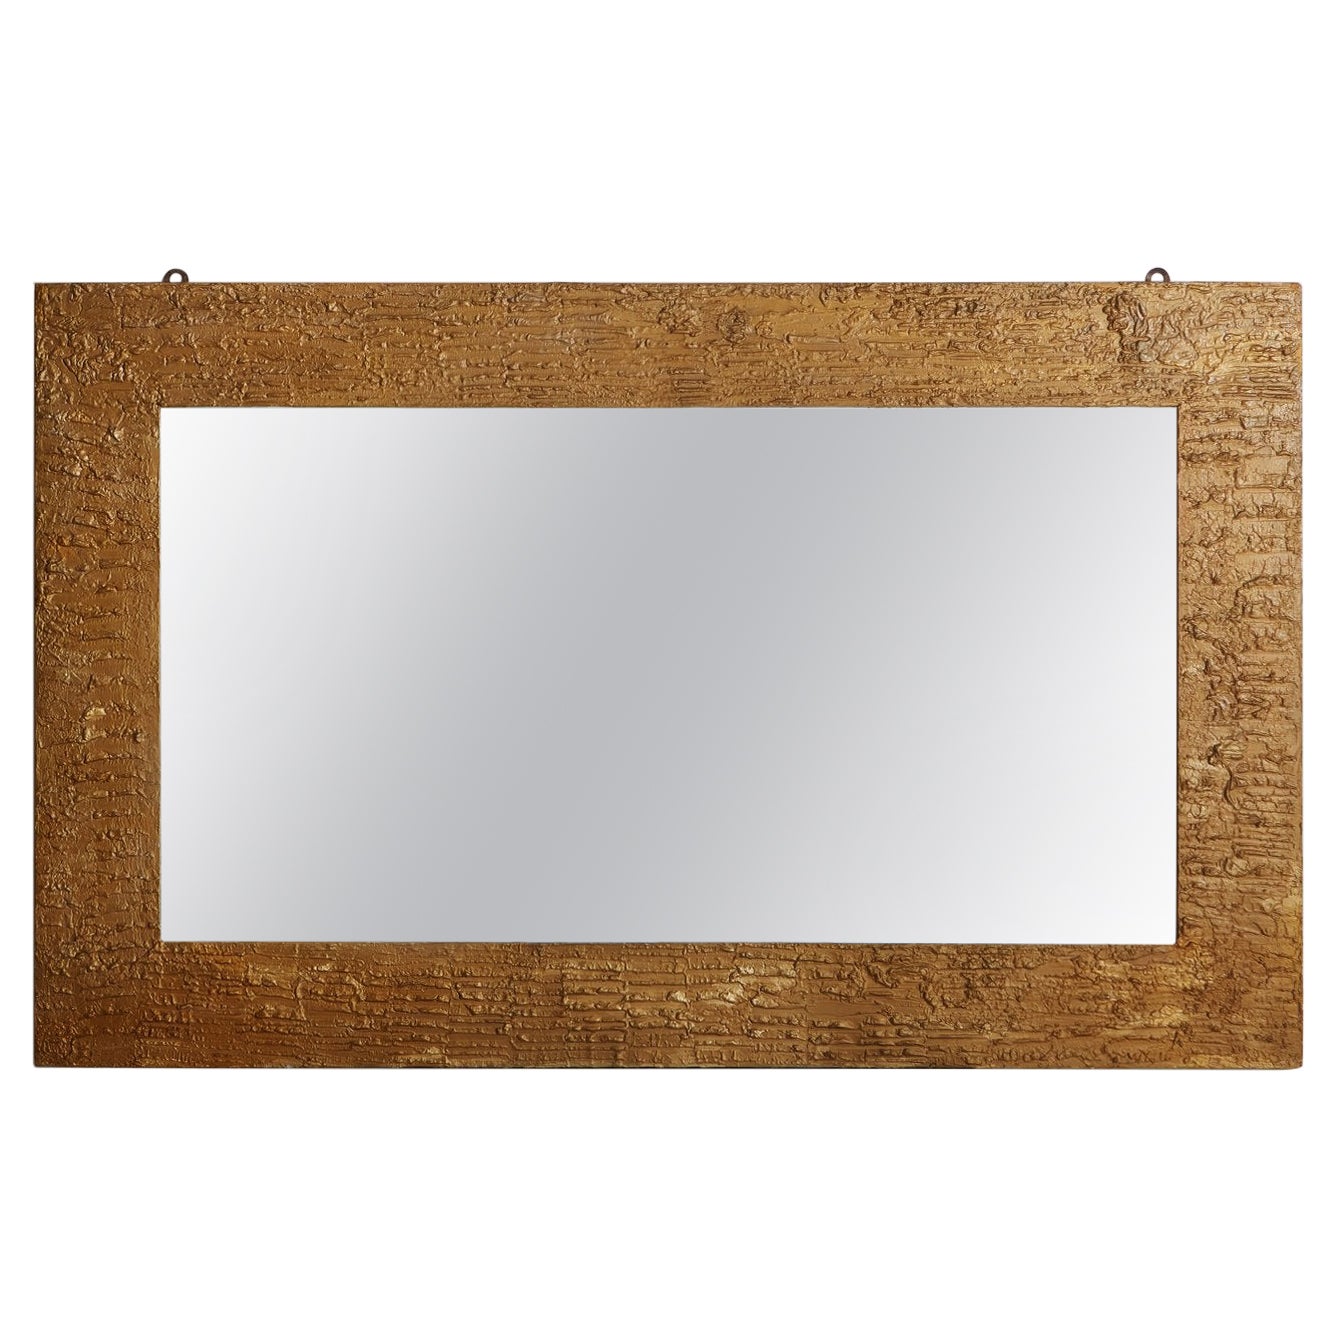 Gold Plaster Frame Wall Mirror, Italy, 1970s For Sale